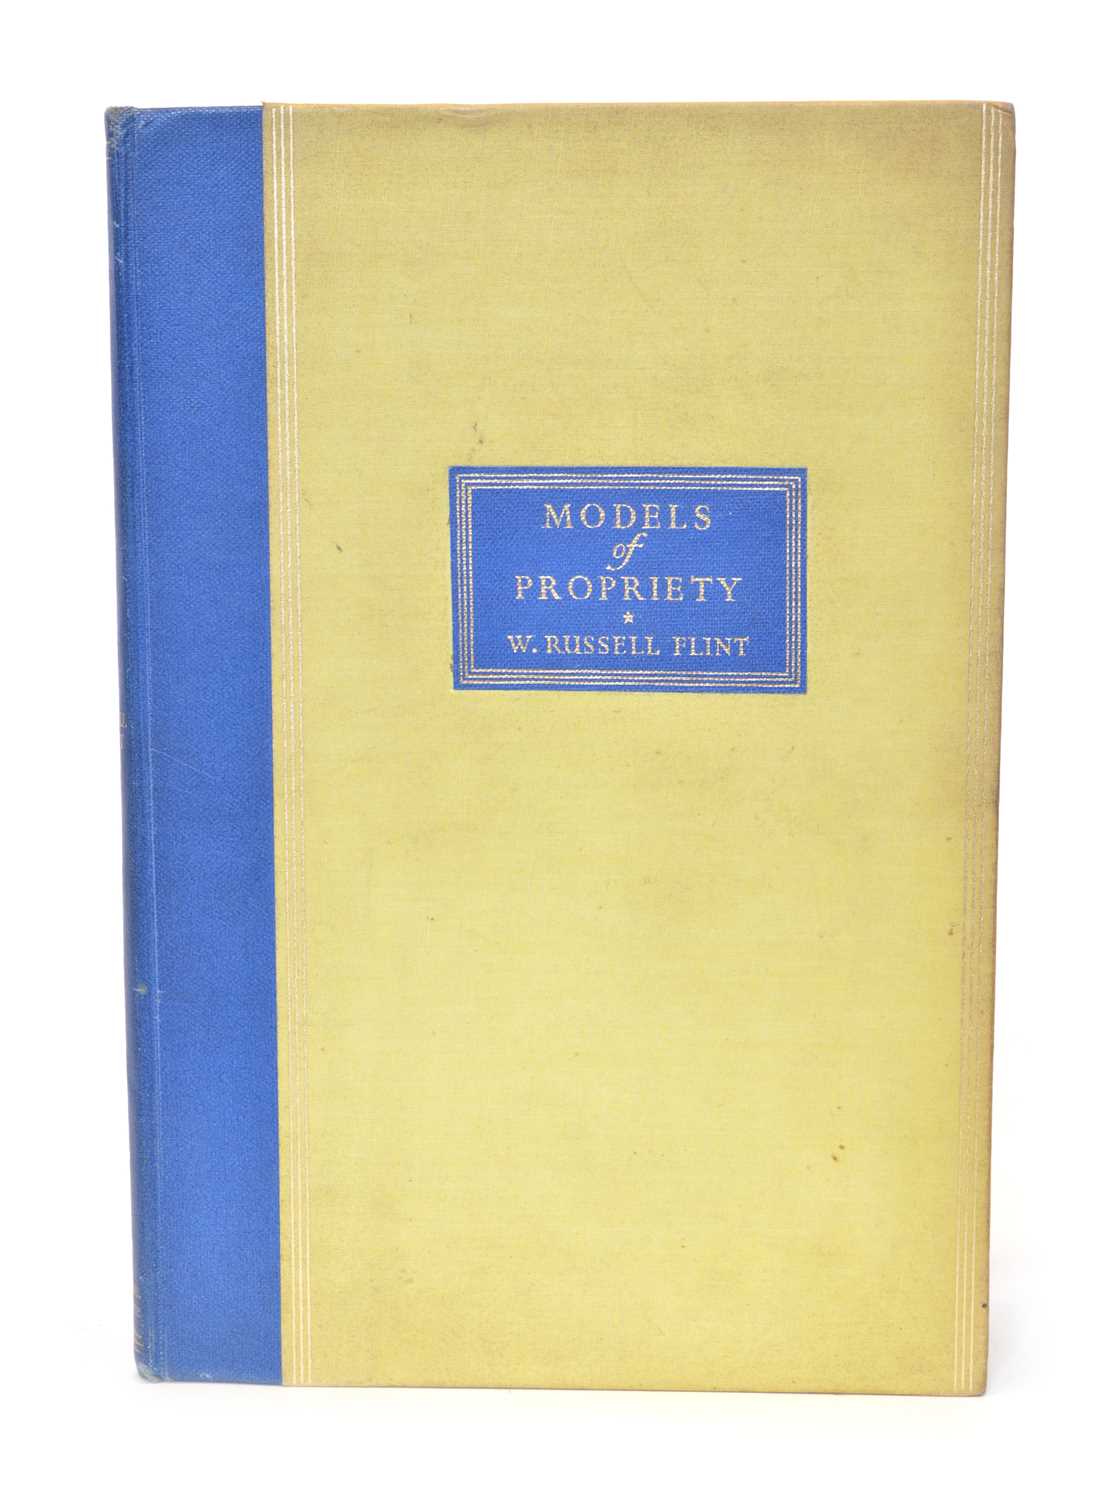 Lot 50 - Models of Propriety